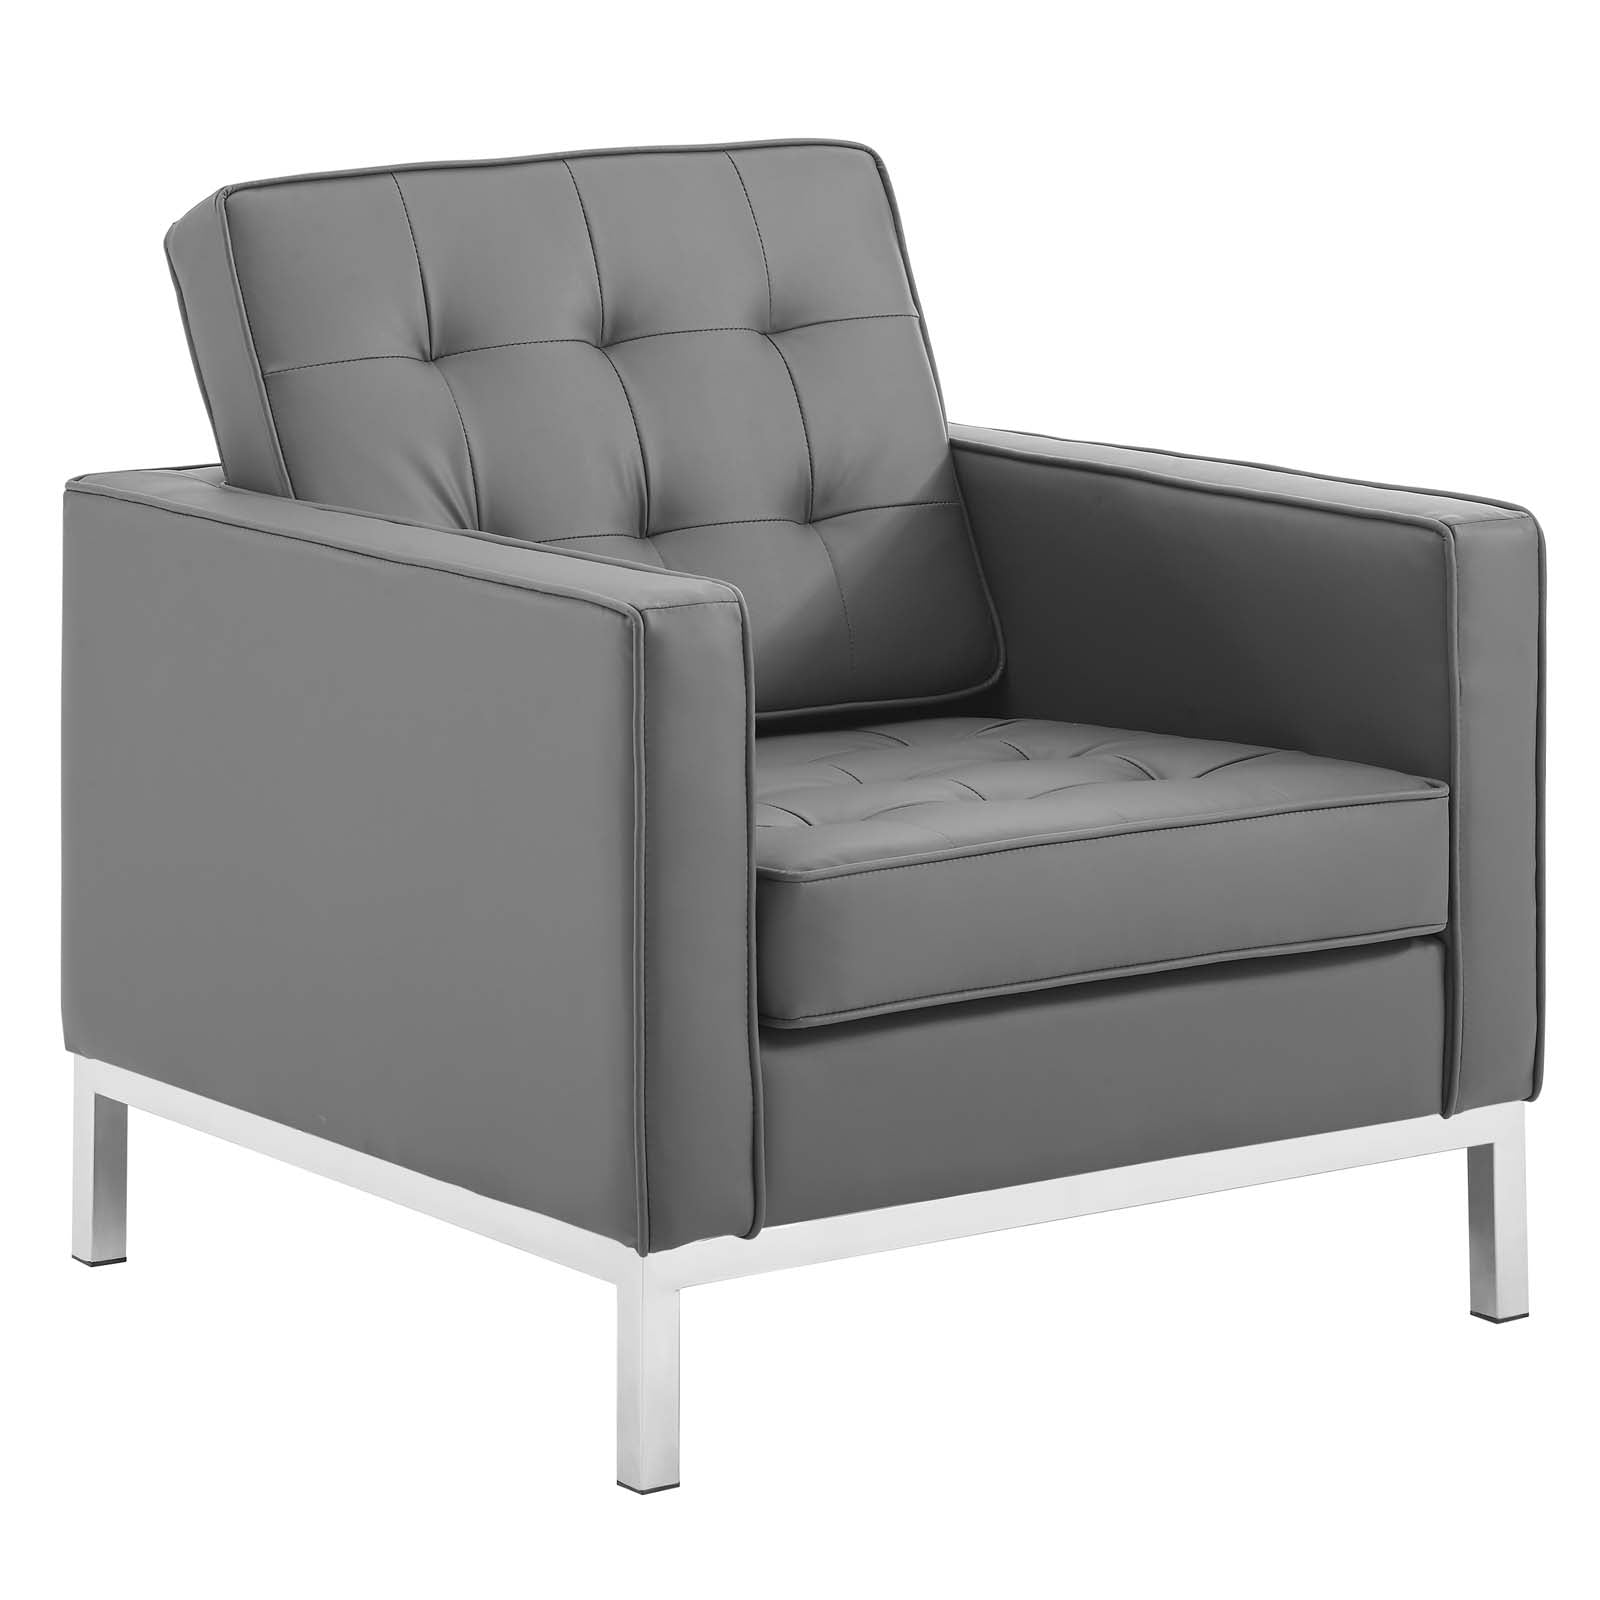 Modway Living Room Sets - Loft Tufted Upholstered Faux Leather Loveseat and Armchair Set Silver Gray